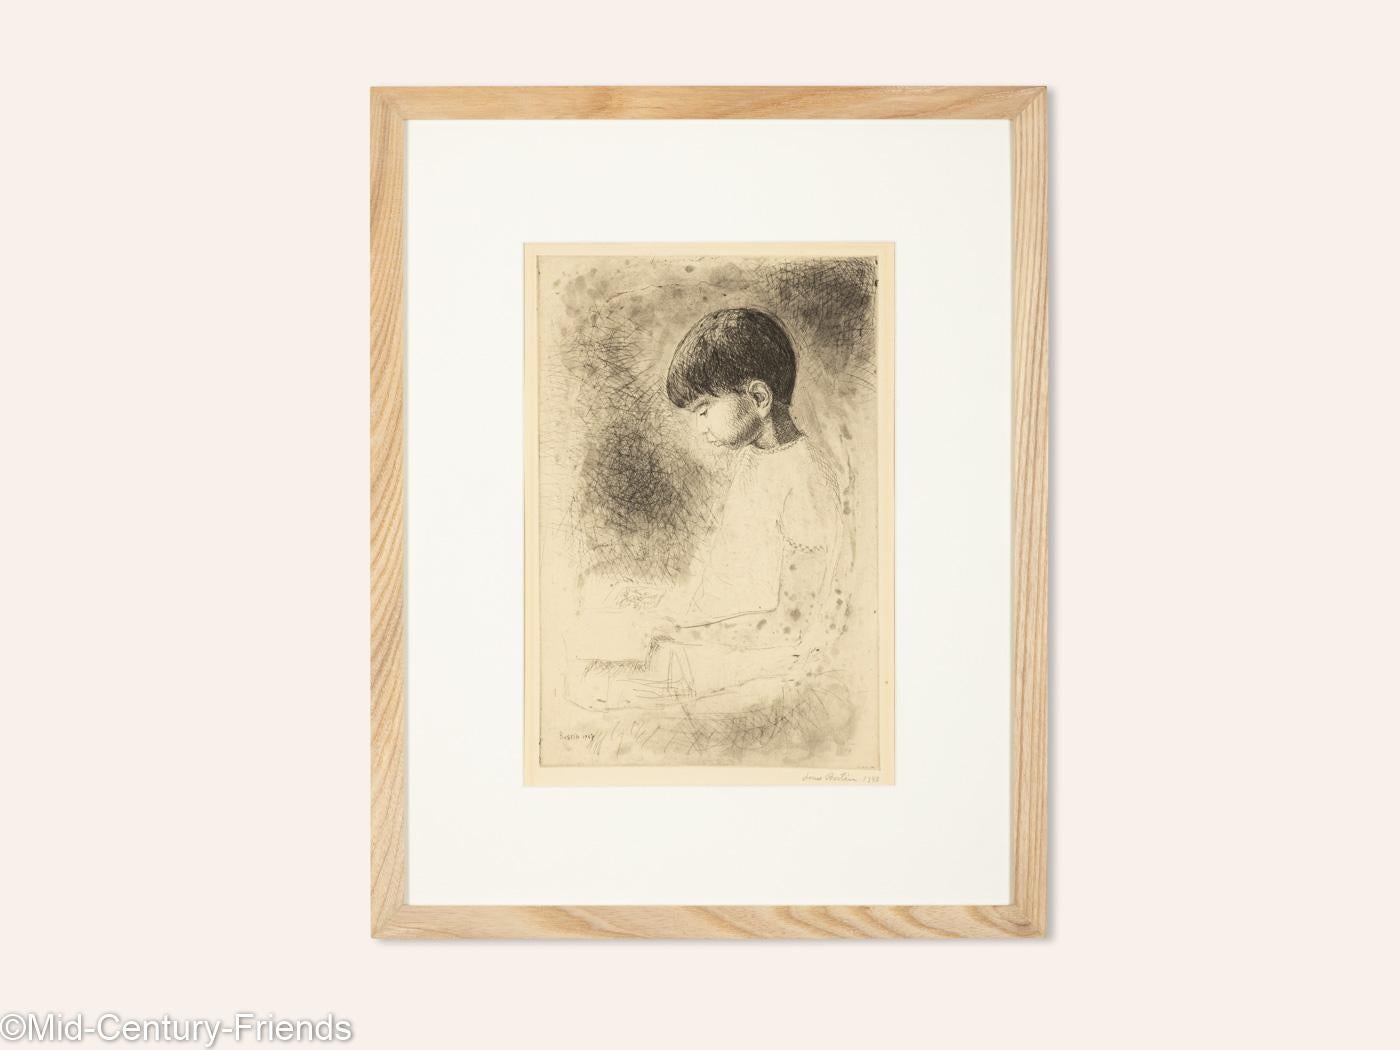 Louis BASTIN Study of a boy. This Etching shows the Portrait Study of a little boy. Handsigned and dated on 1948. Ready to hang. Framed with a passepartout in a handcrafted ash wood picture frame behind anti-reflective acrylic glass.
Size without